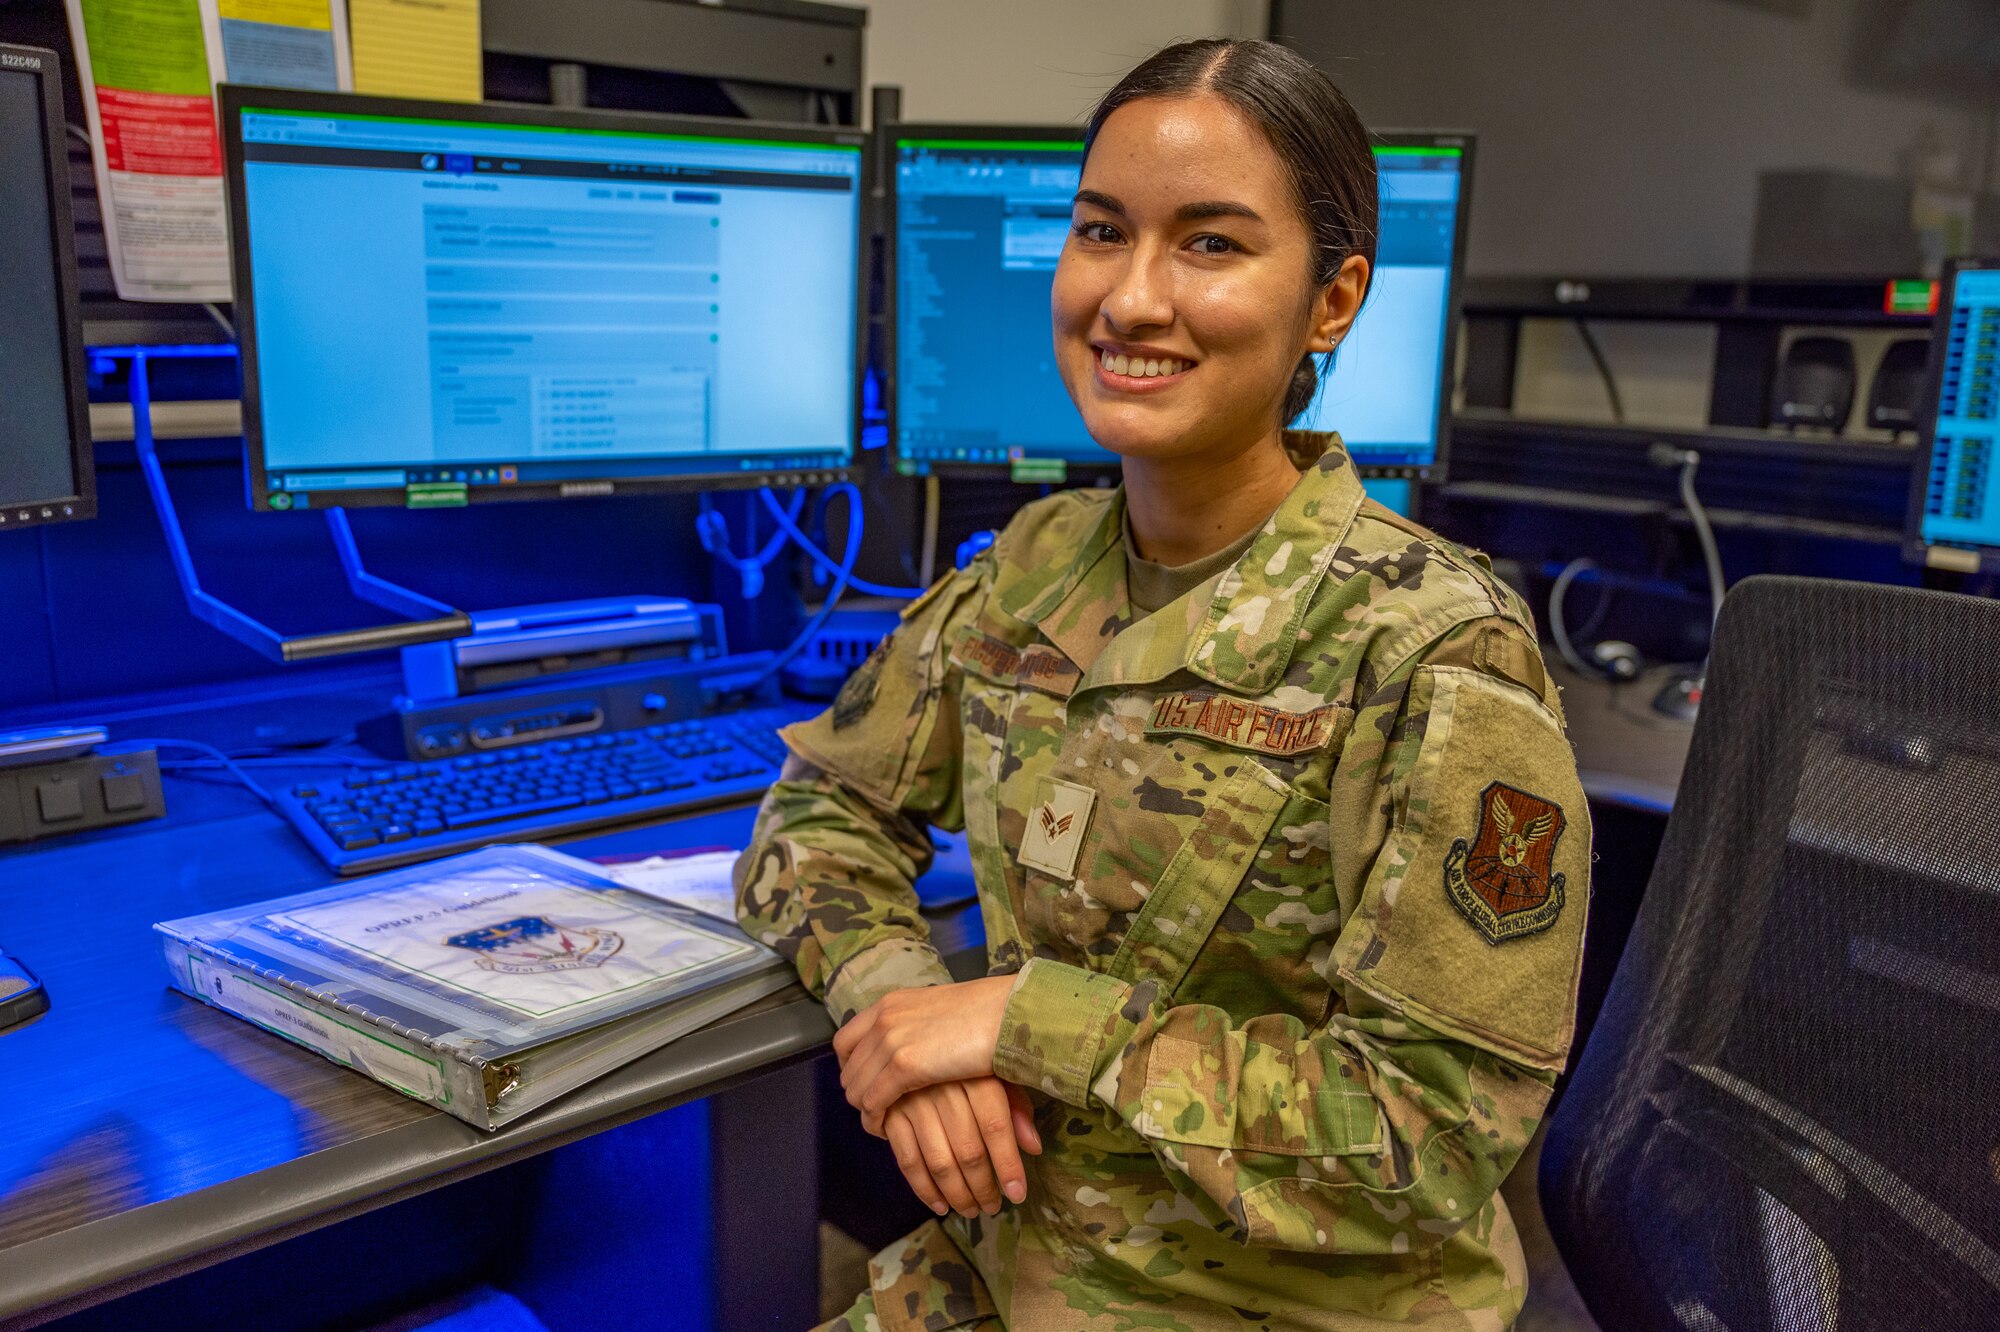 SrA Monica Figueroa Santos, 341st Missile Wing Command Post senior nuclear command and control emergency actions controller, poses for a photo July 6, 2022 at Malmstrom Air Force Base, Mont.